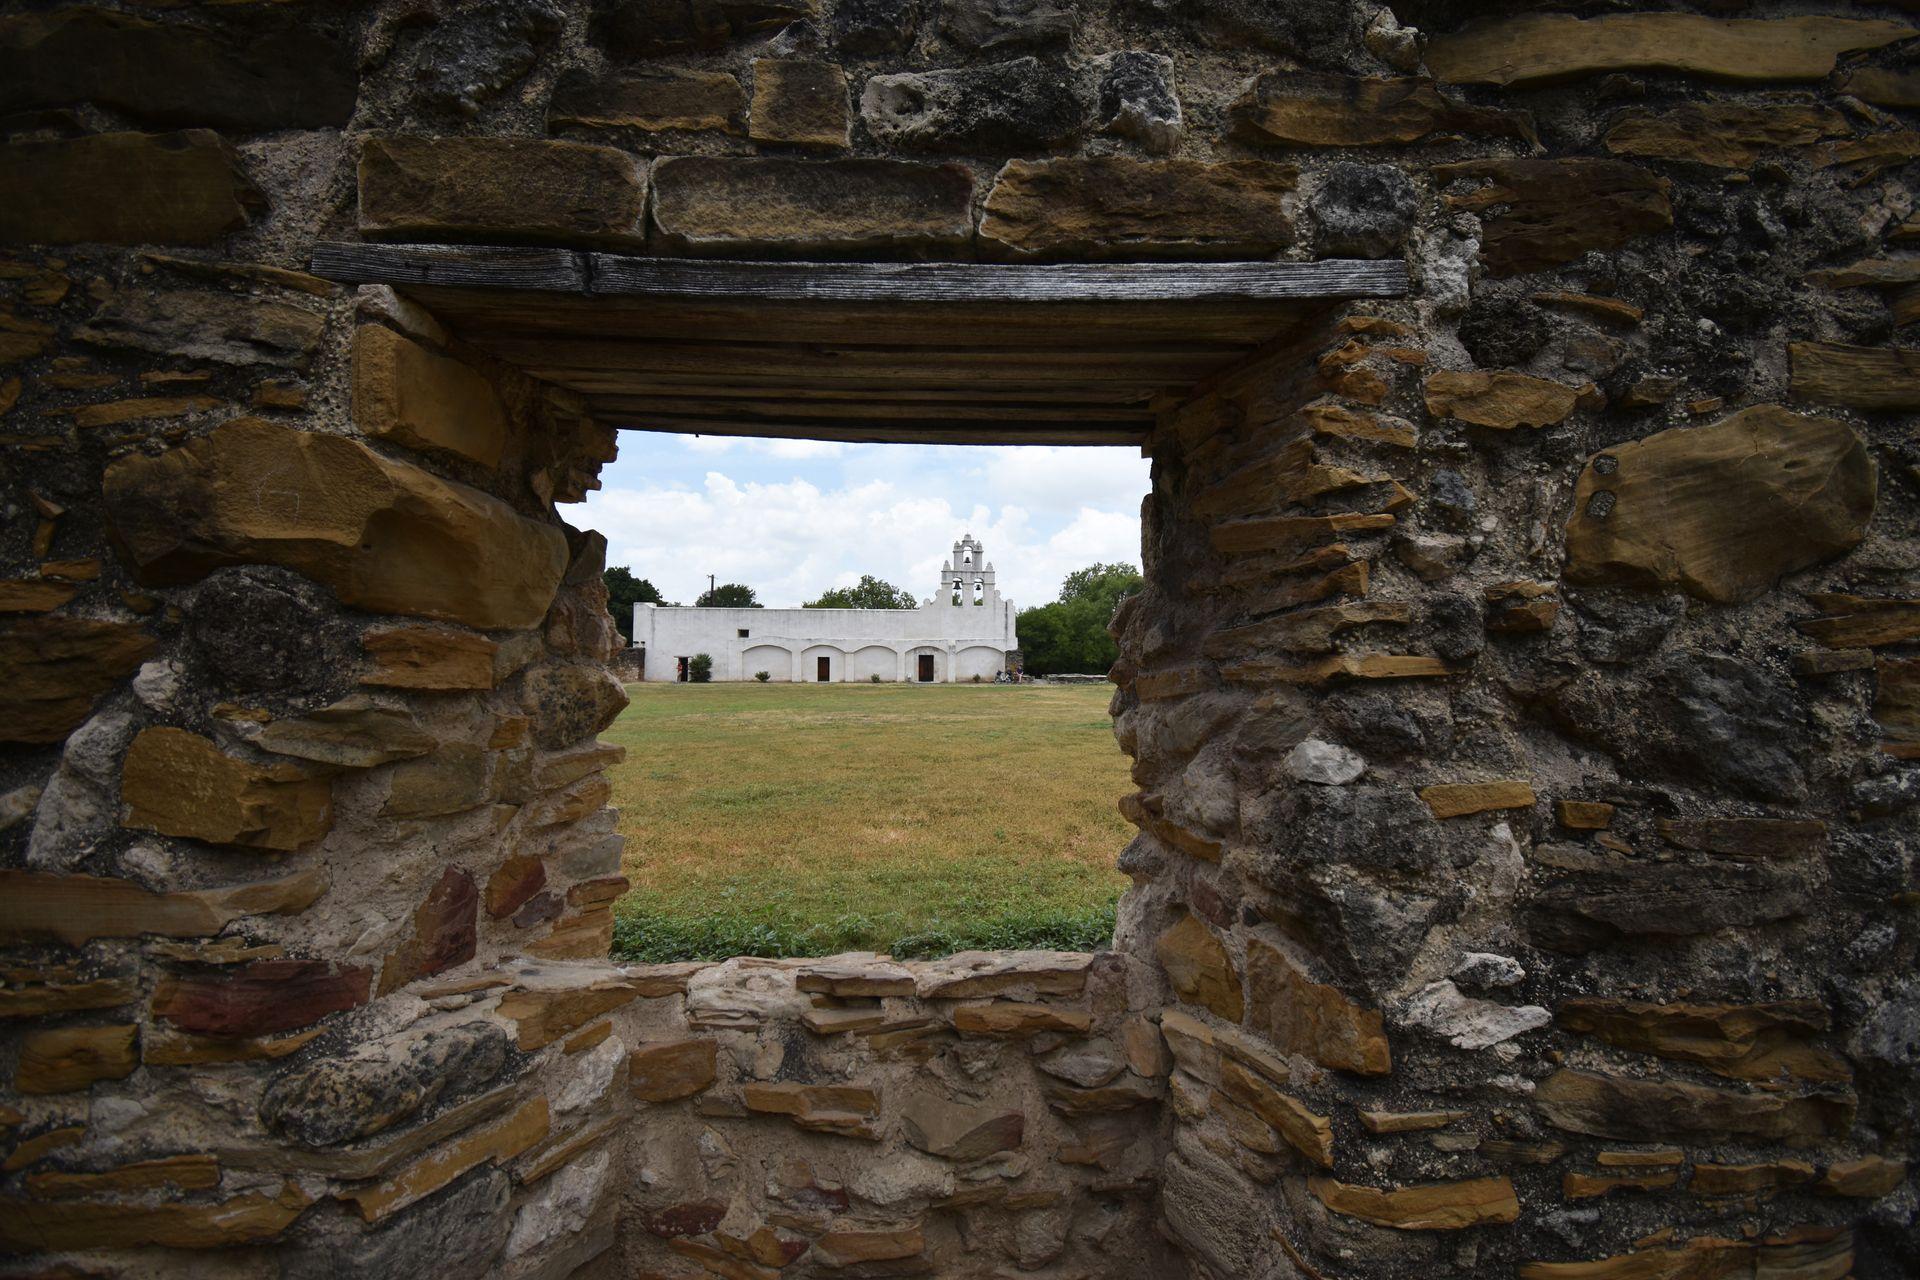 Looking through a square, brick window to see the white Mission San Juan in the distance.